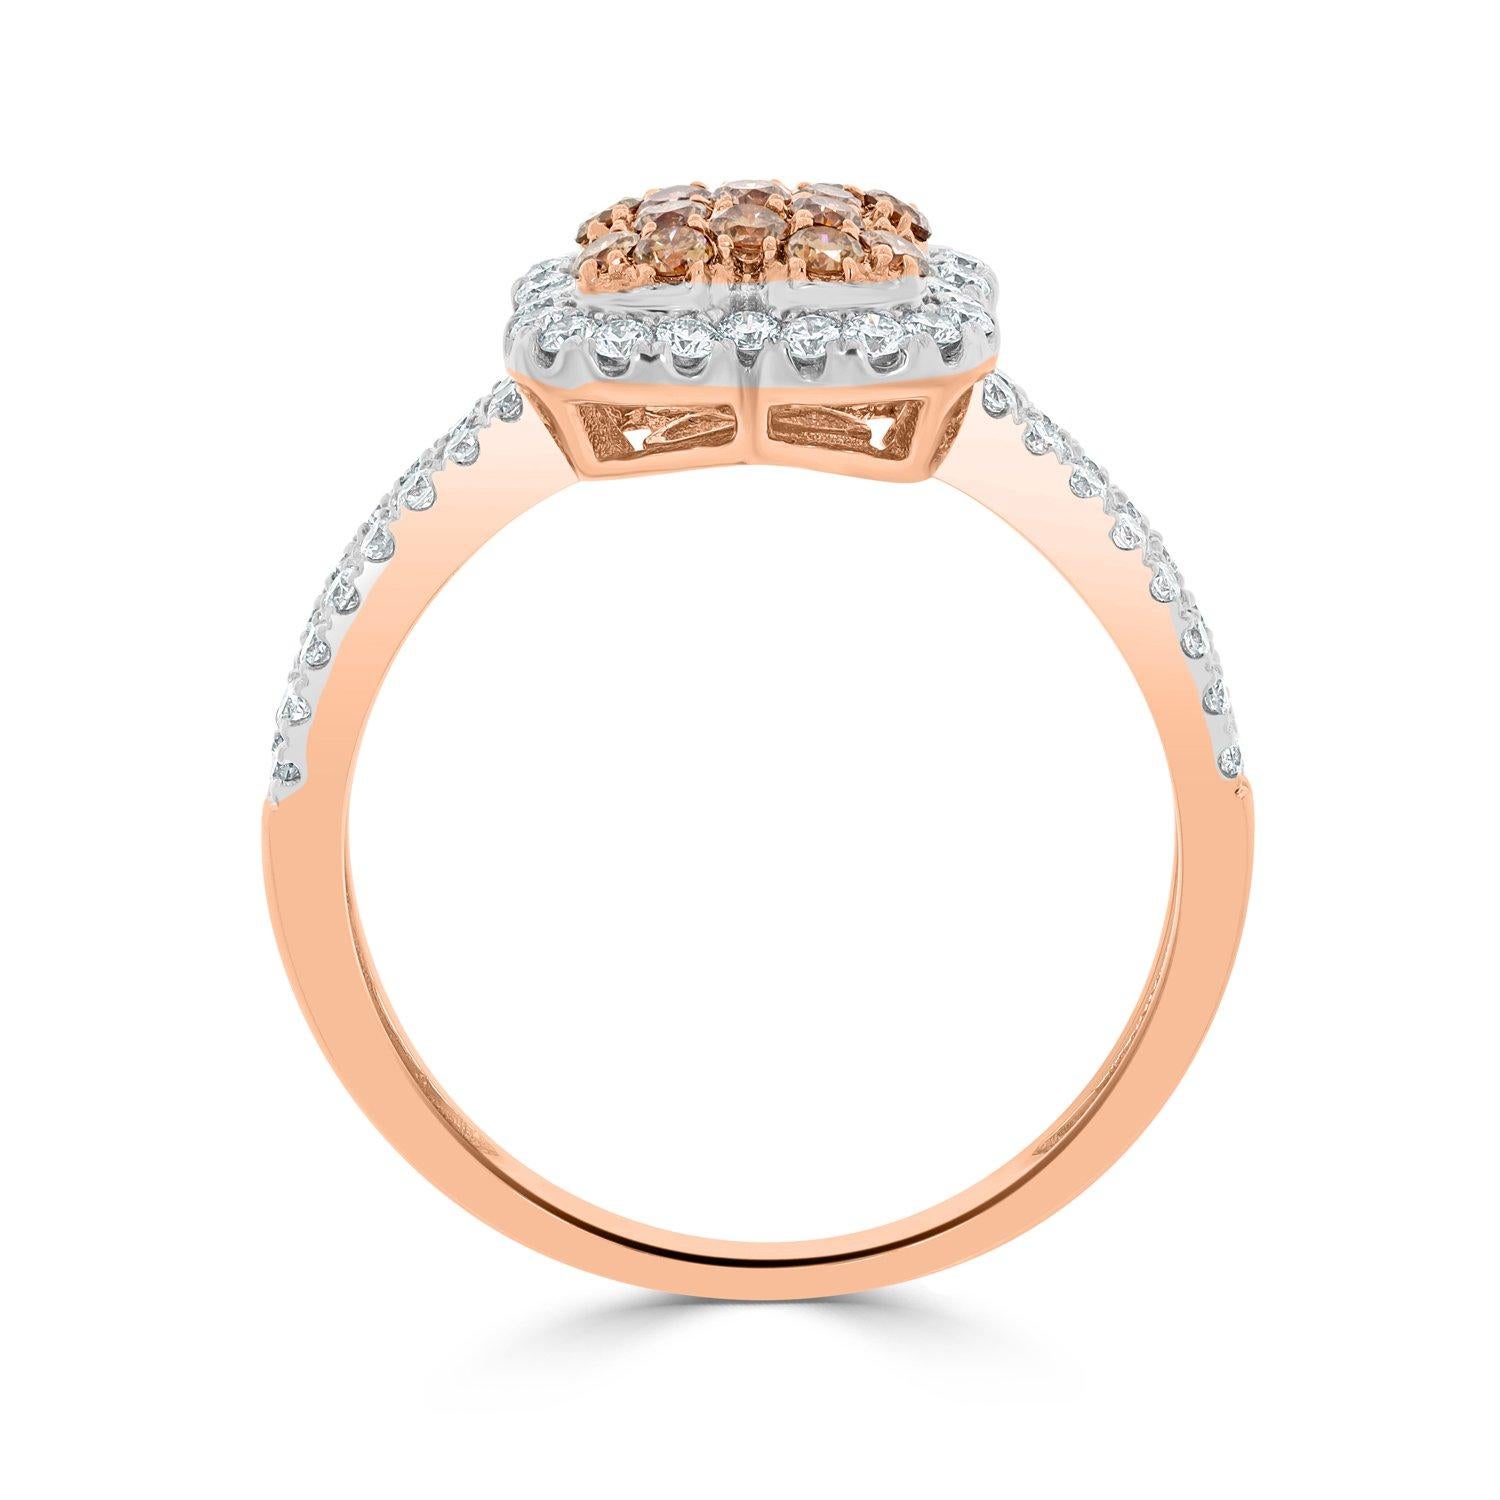 0.28ct Pink Diamonds Ring with 0.43tct Diamonds Set in 14k Rose Gold For Sale 1